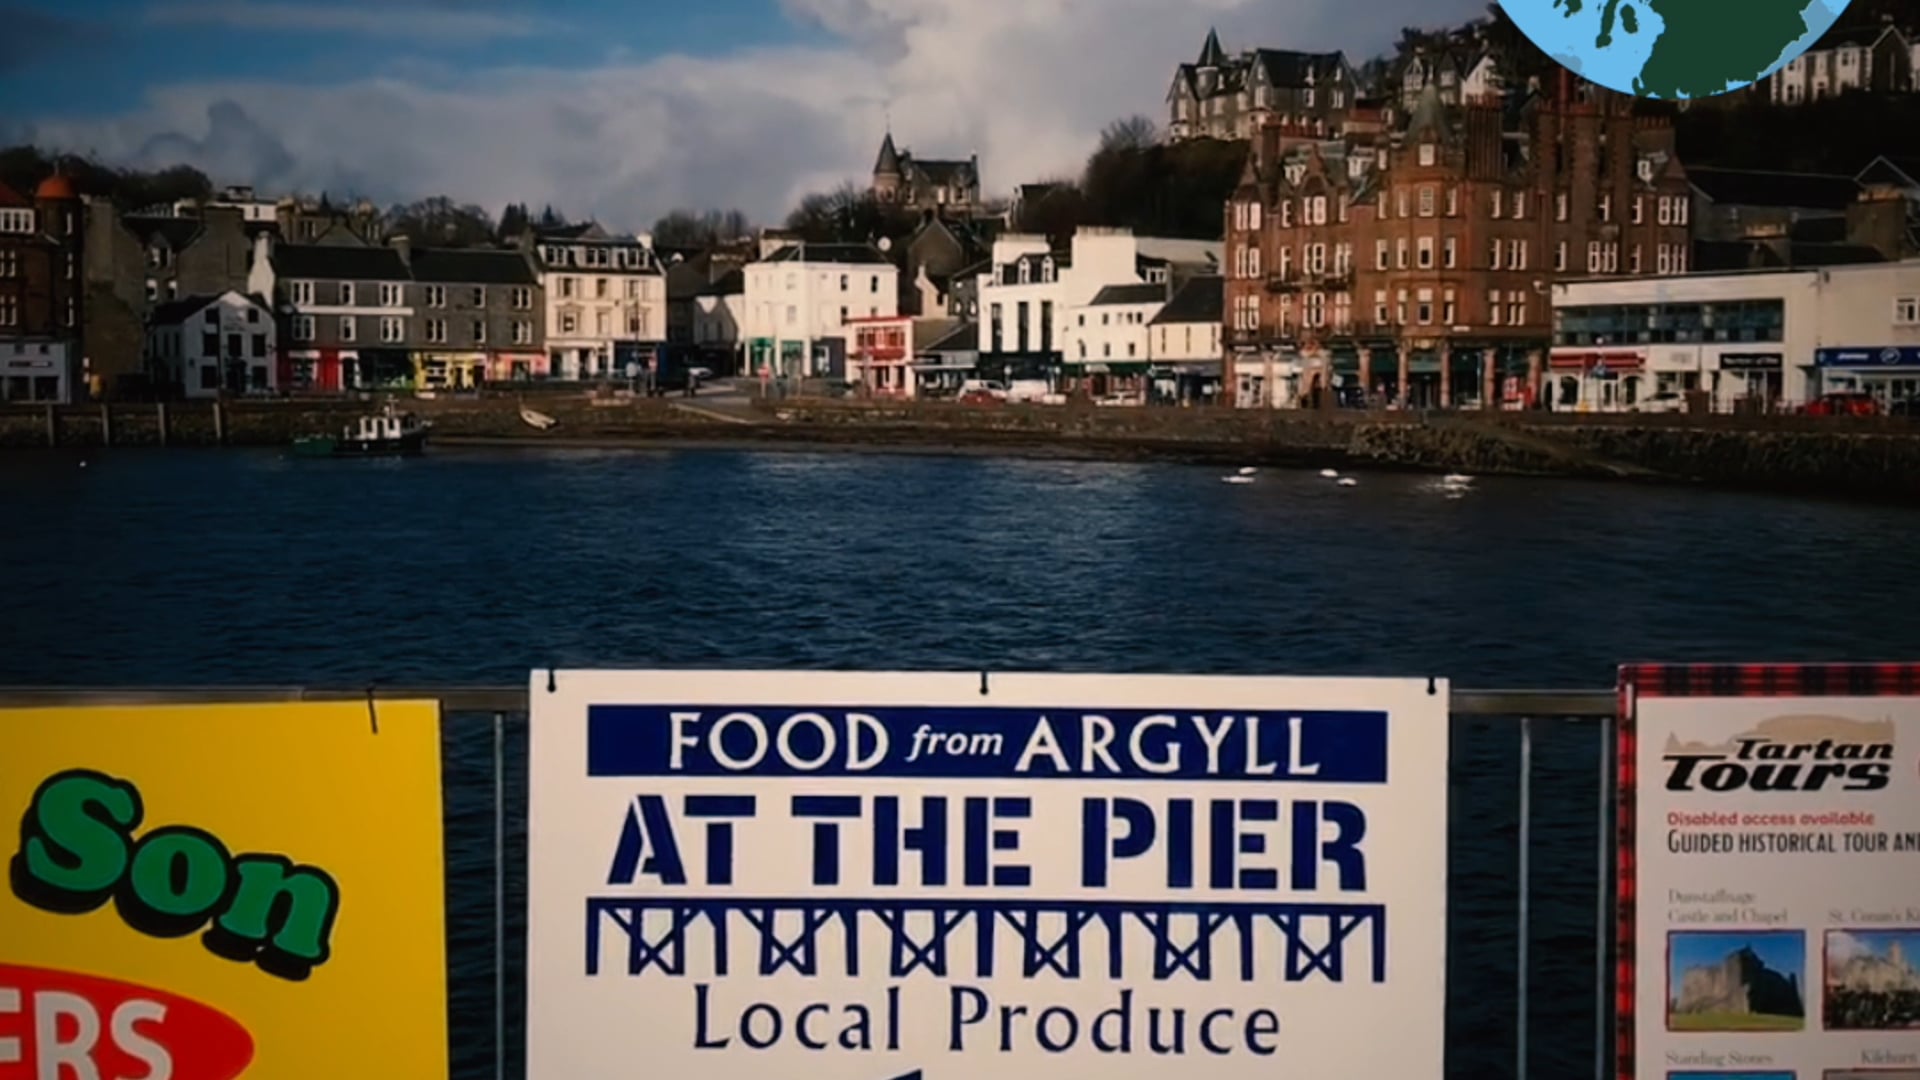 At The Pier Cafe - Food from Argyll